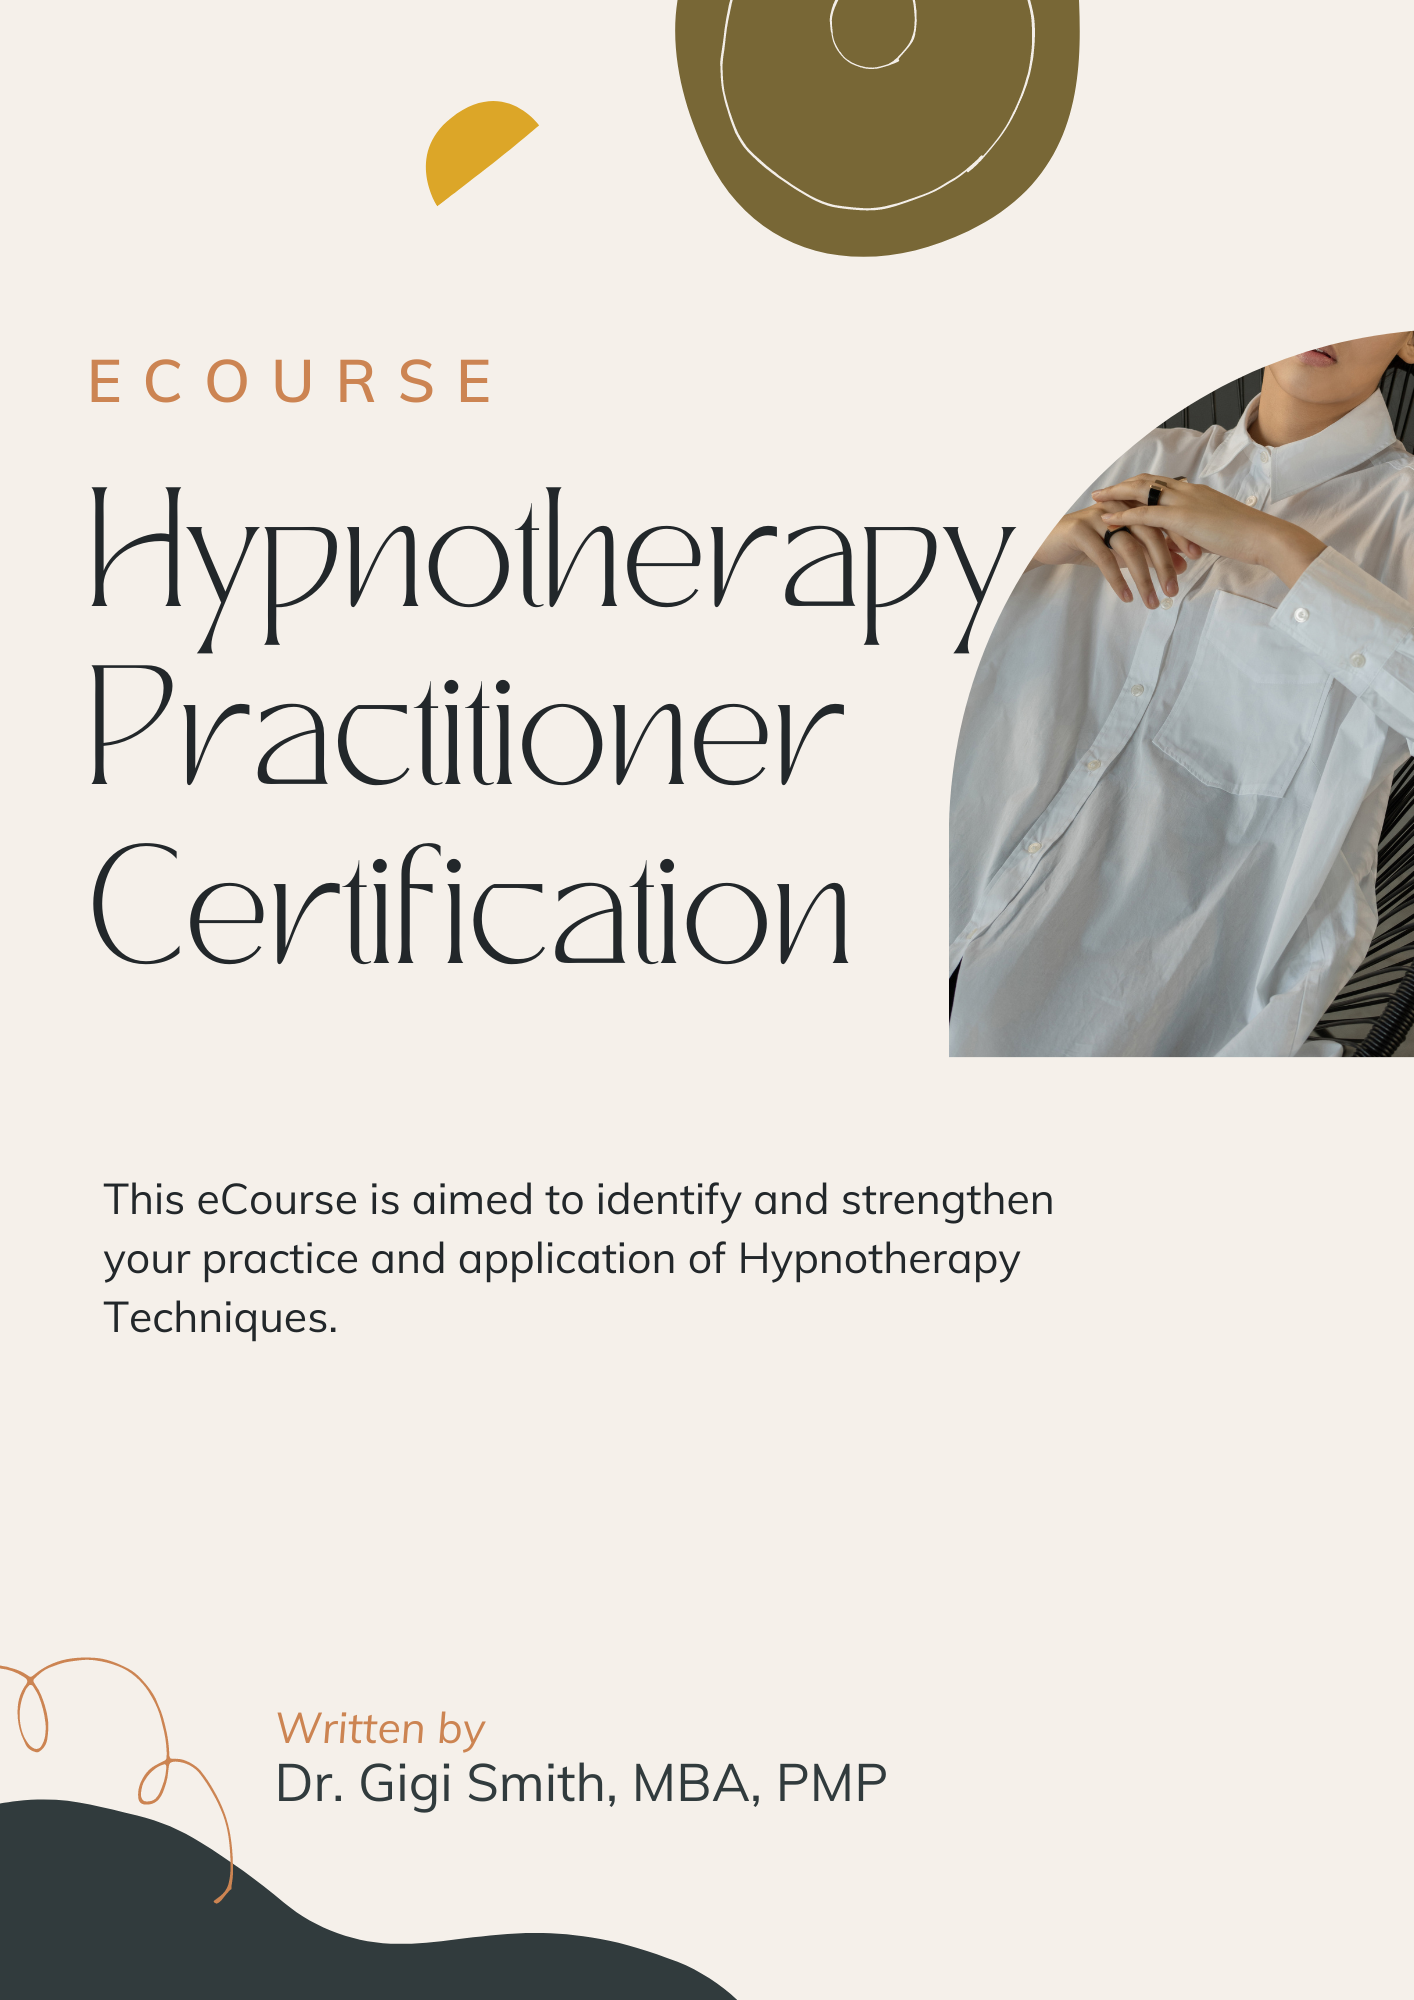 Hypnotherapy Practitioner Certification (Accredited)